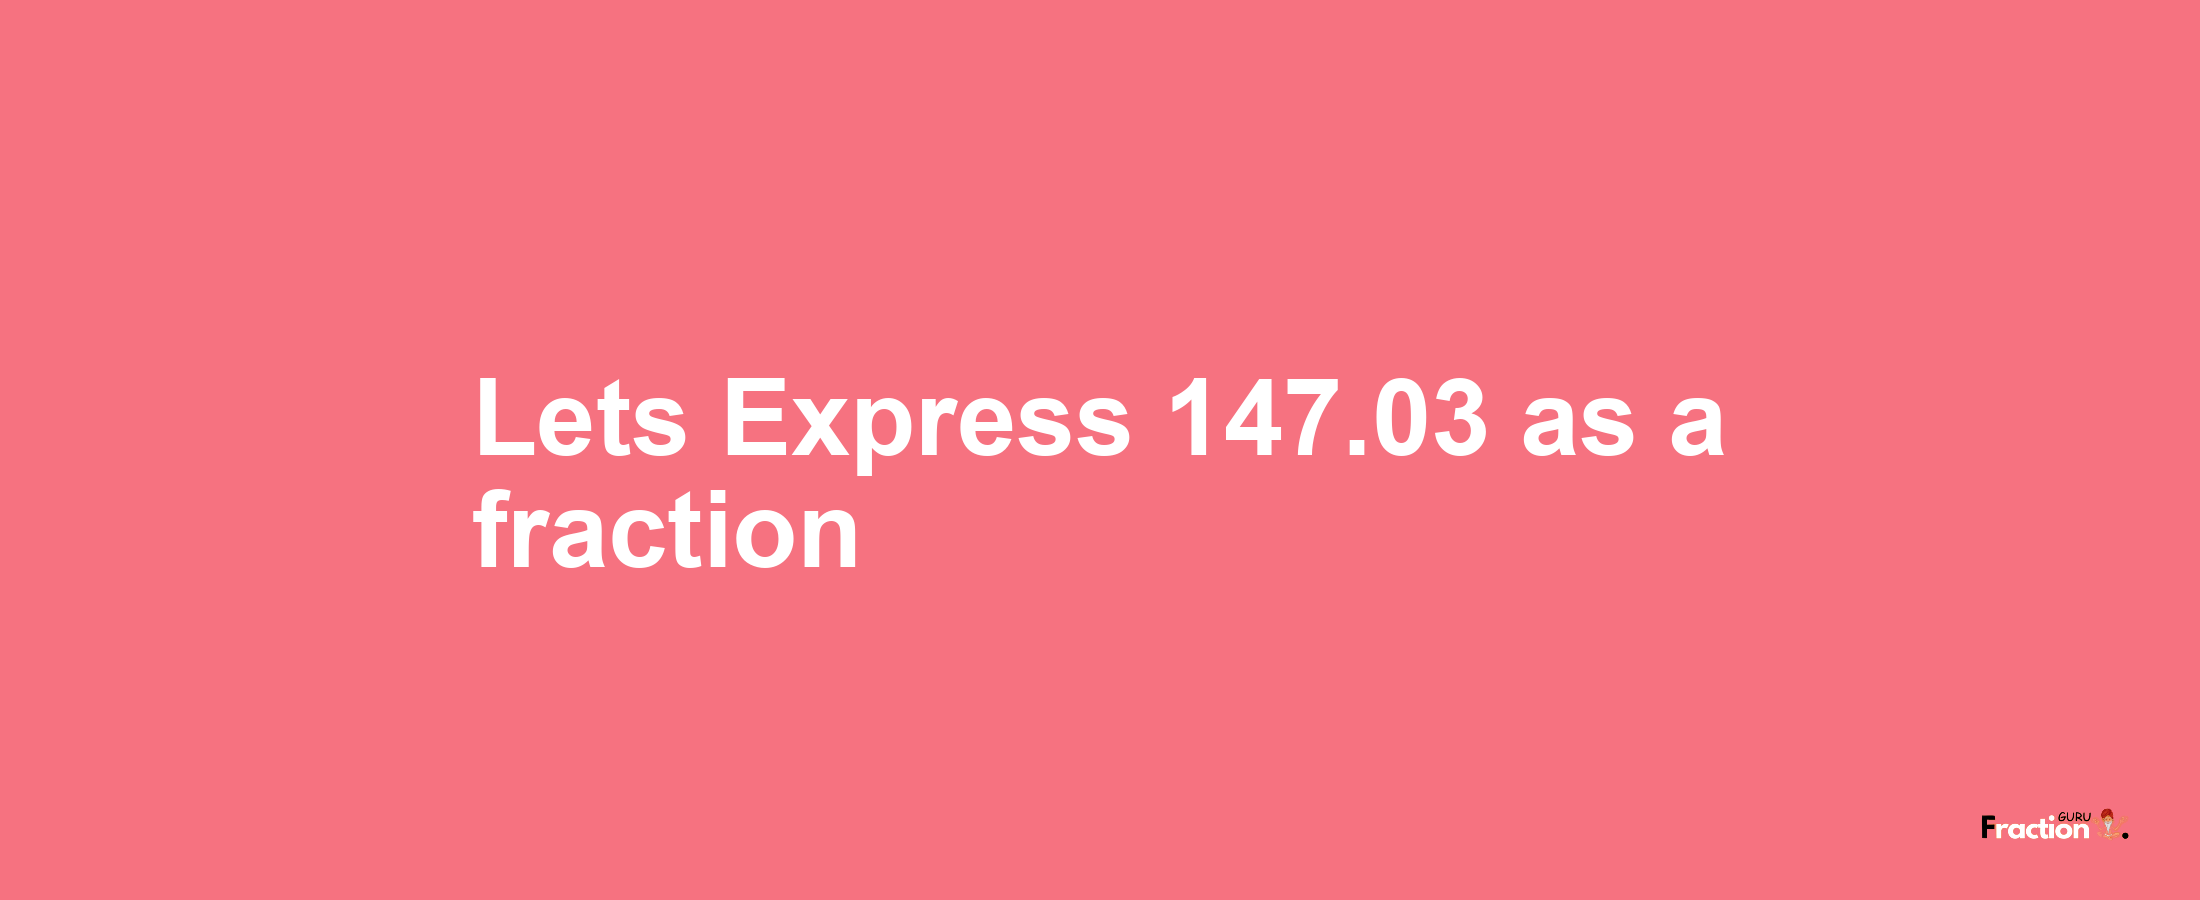 Lets Express 147.03 as afraction